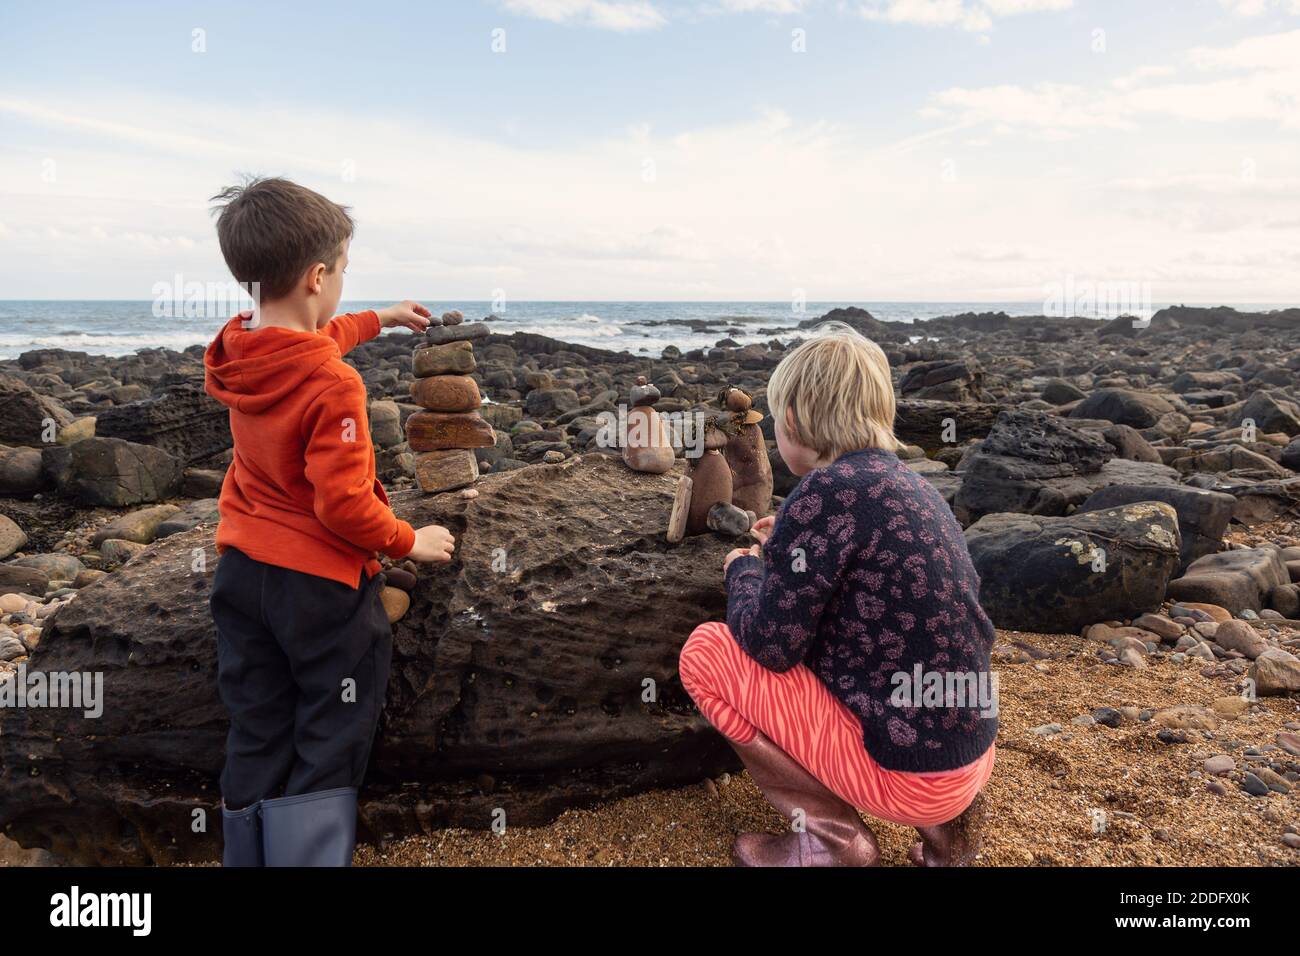 Siblings putting the finishing touches to their little rock people creations. This is a great way to spend time on a beach holiday. Stock Photo